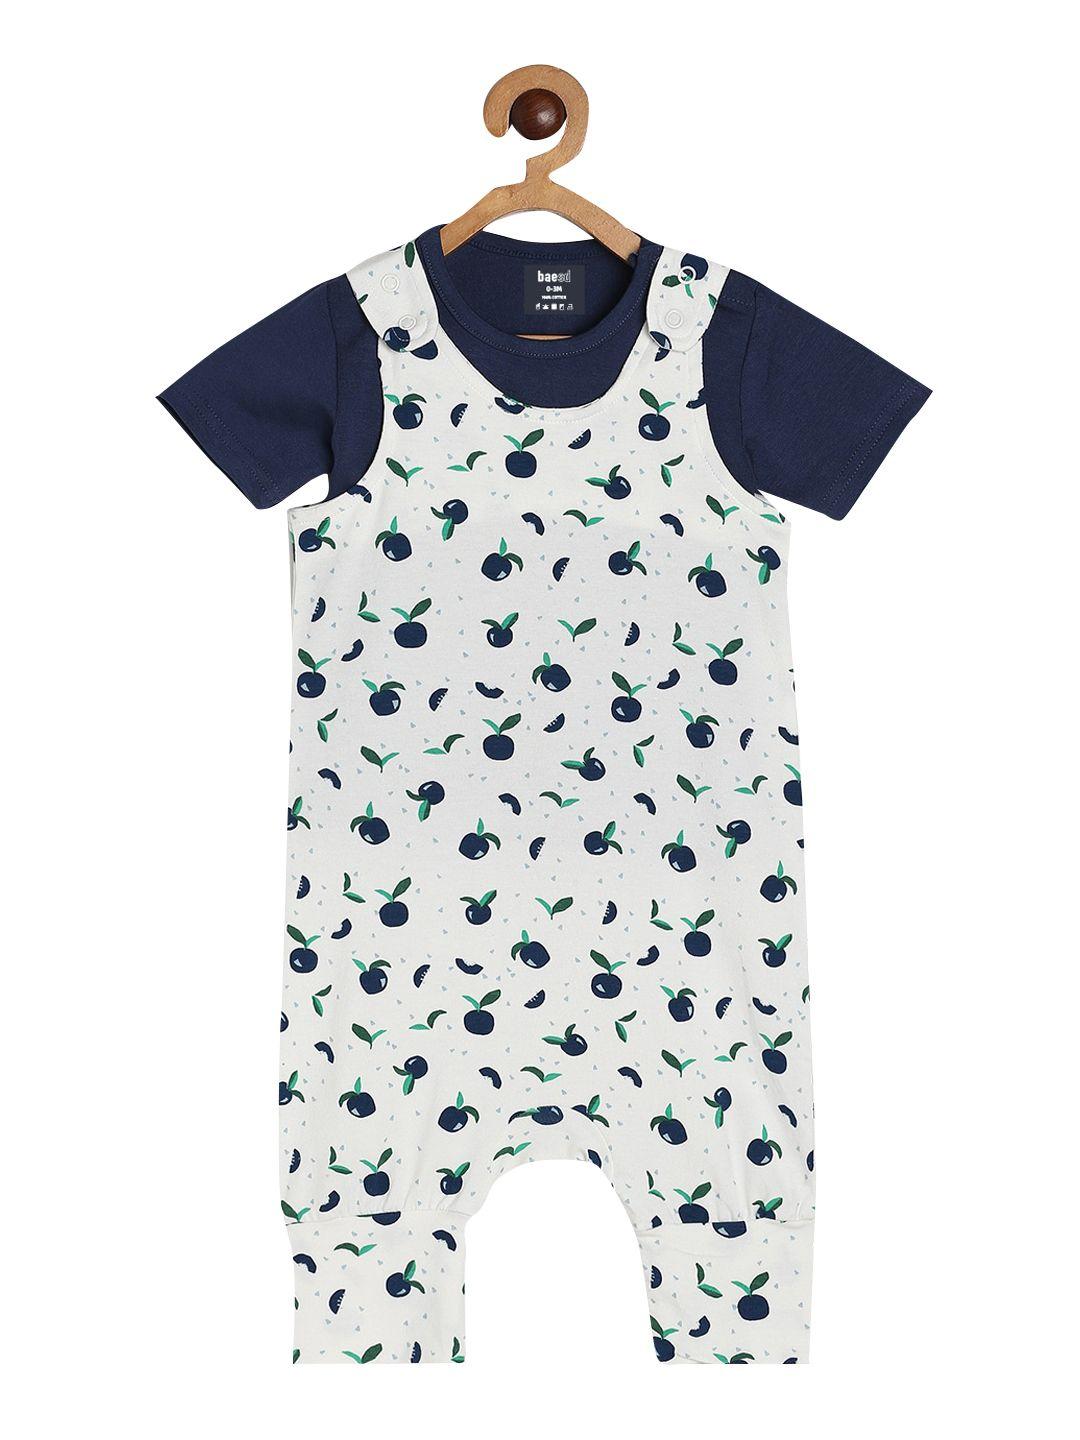 baesd infants kids printed dungaree with t-shirt